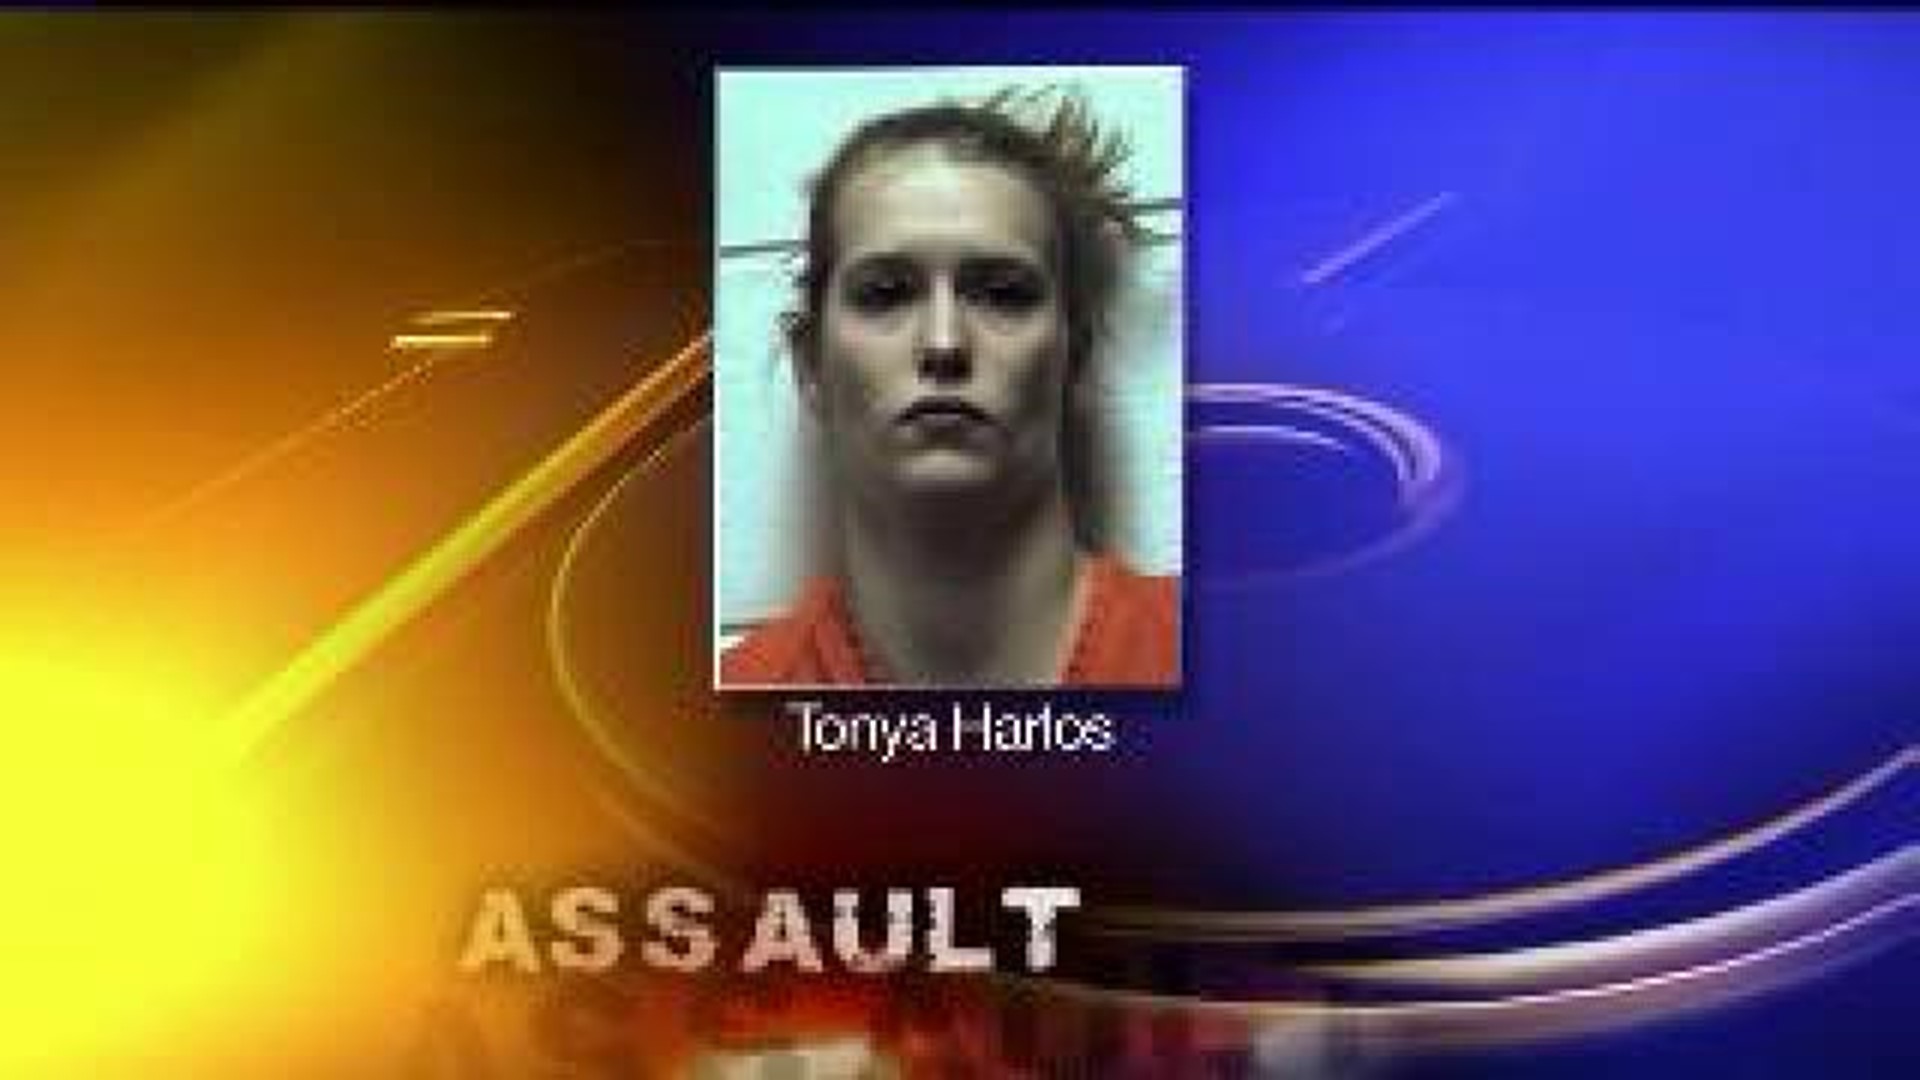 Nursing Home Employee Charged with Assault